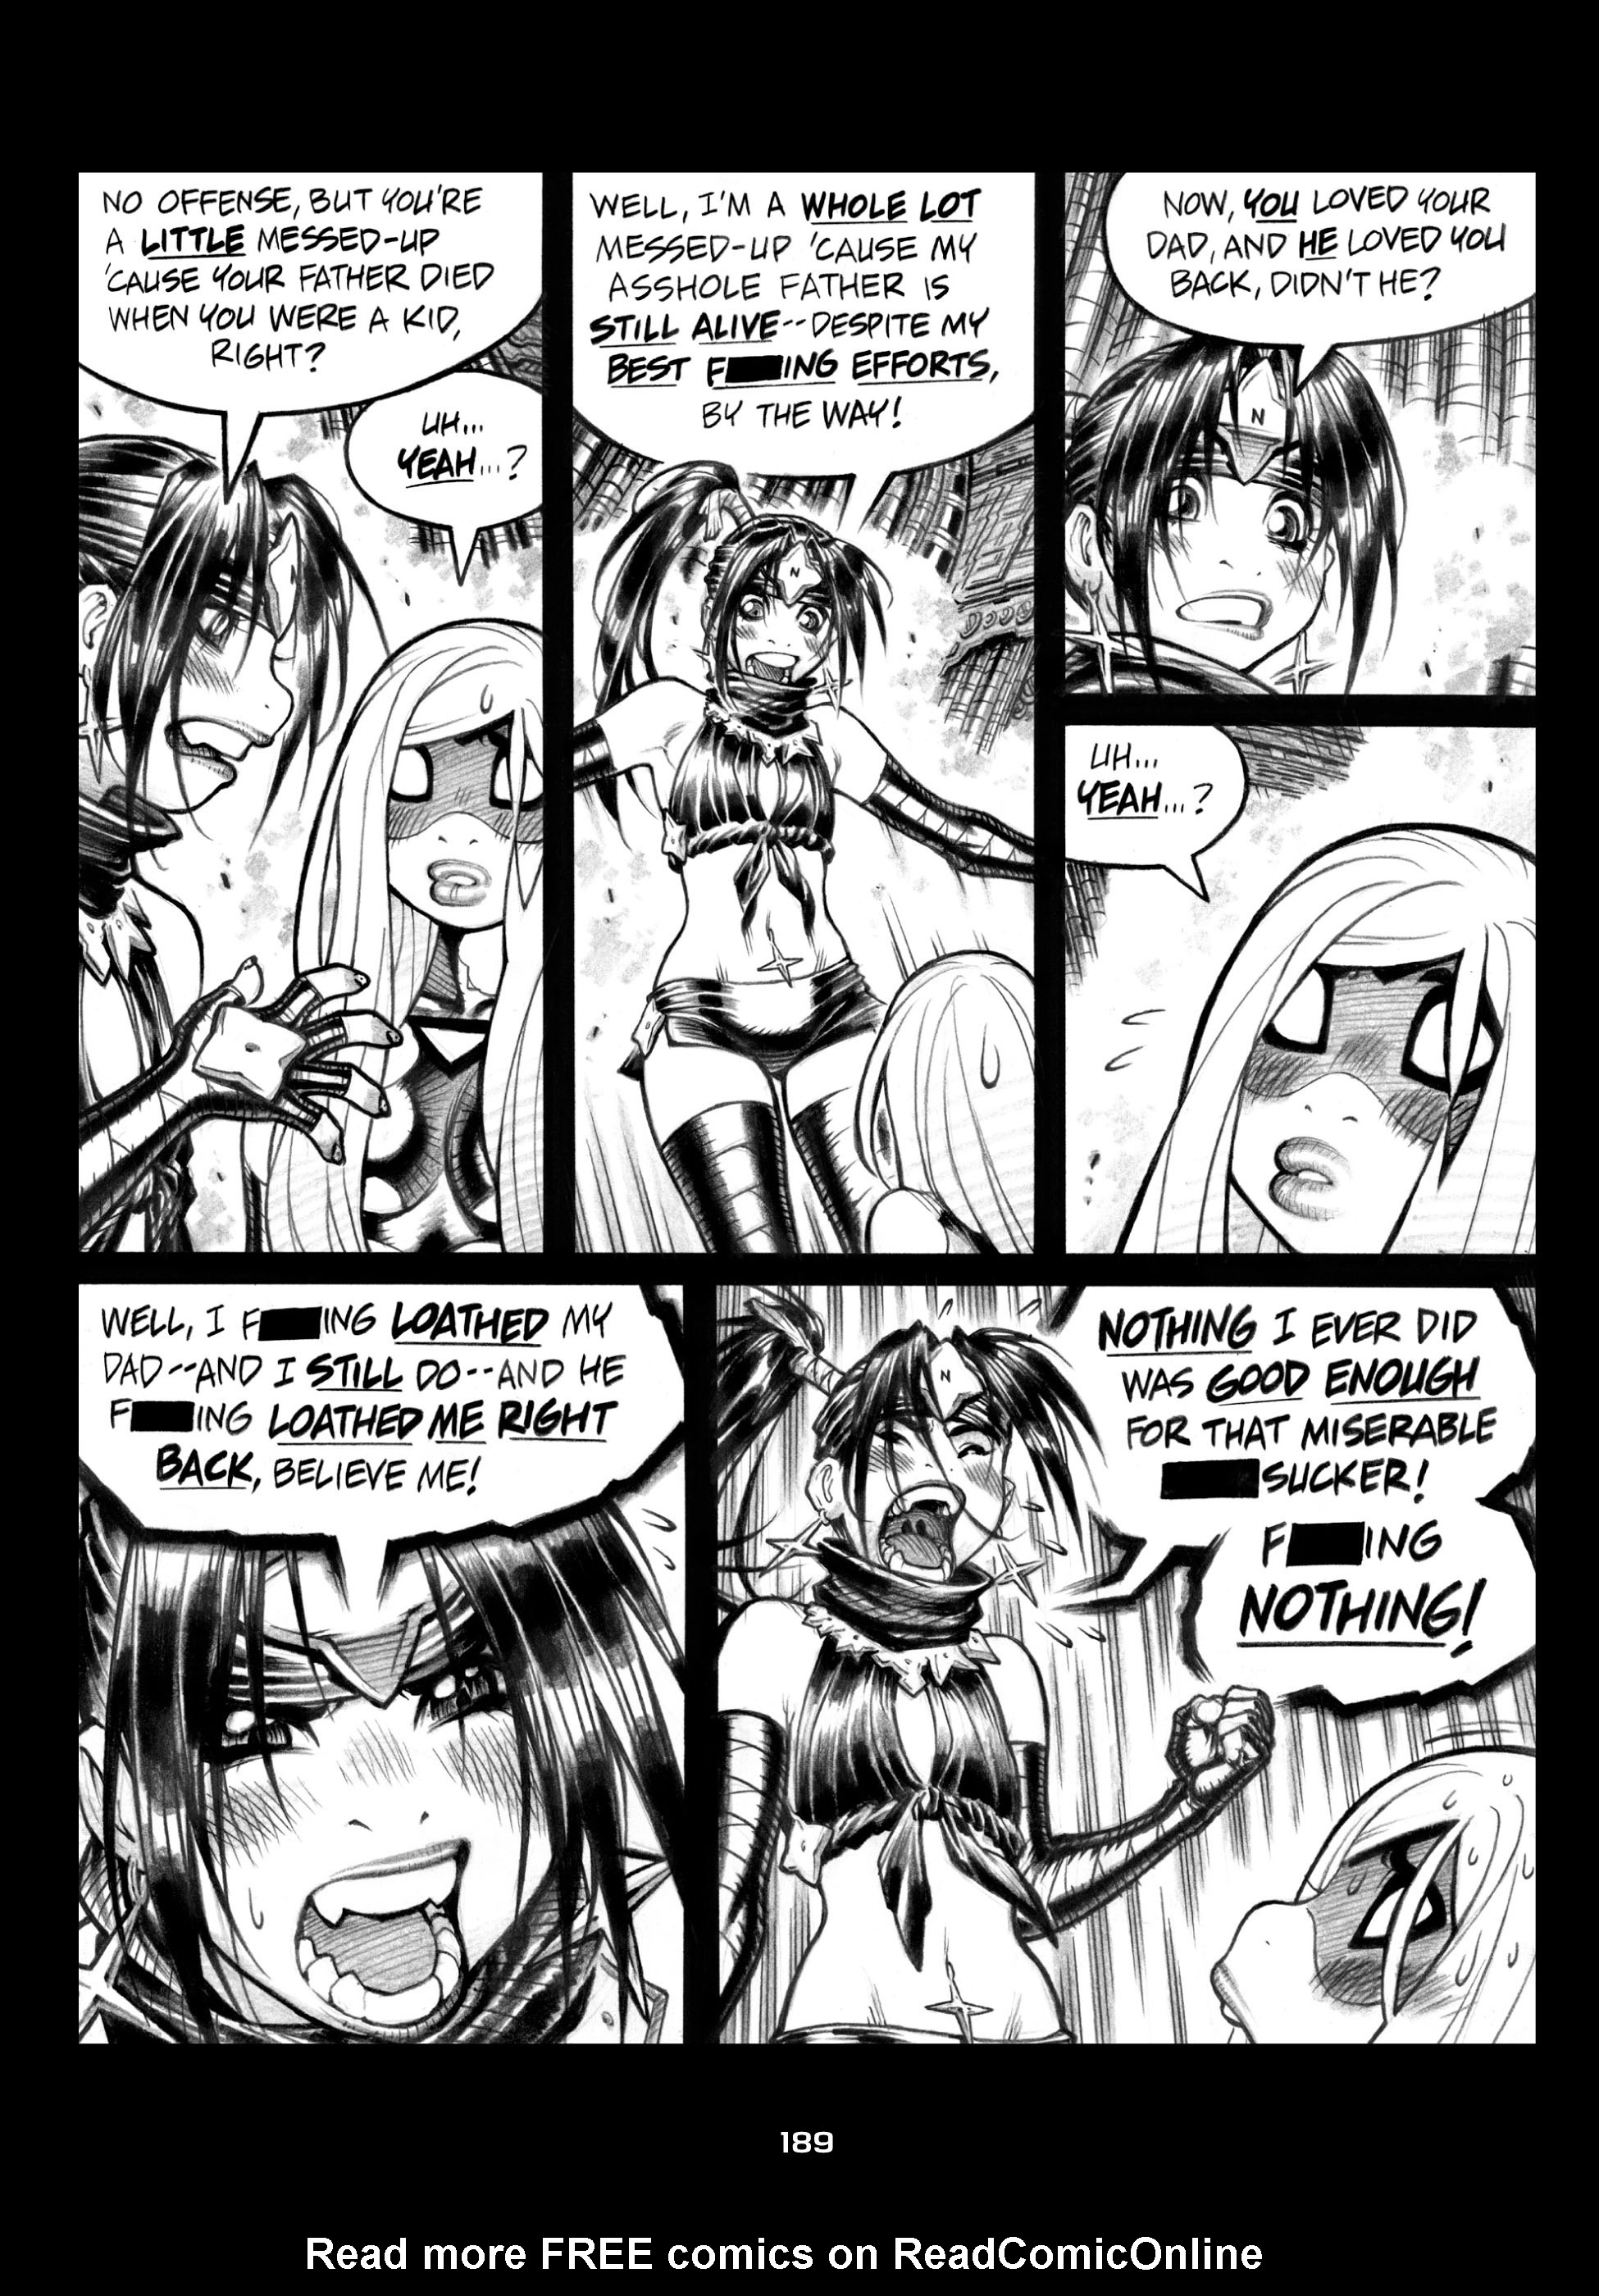 Read online Empowered comic -  Issue #7 - 189